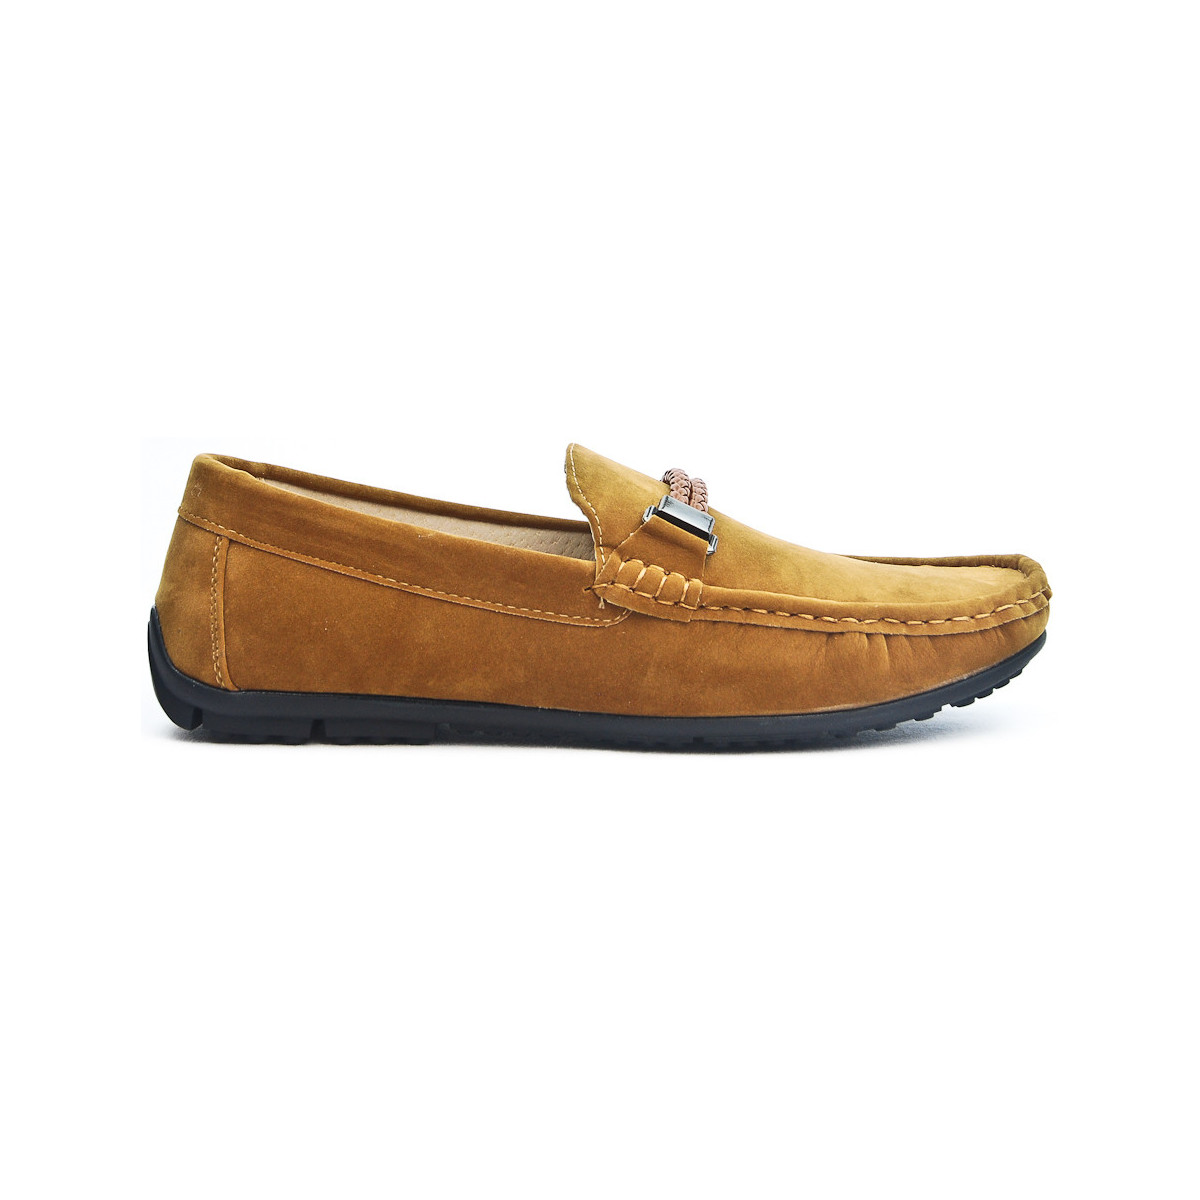 Chaussures Mocassins Uomo Design Mocassin Homme Maddox Camel